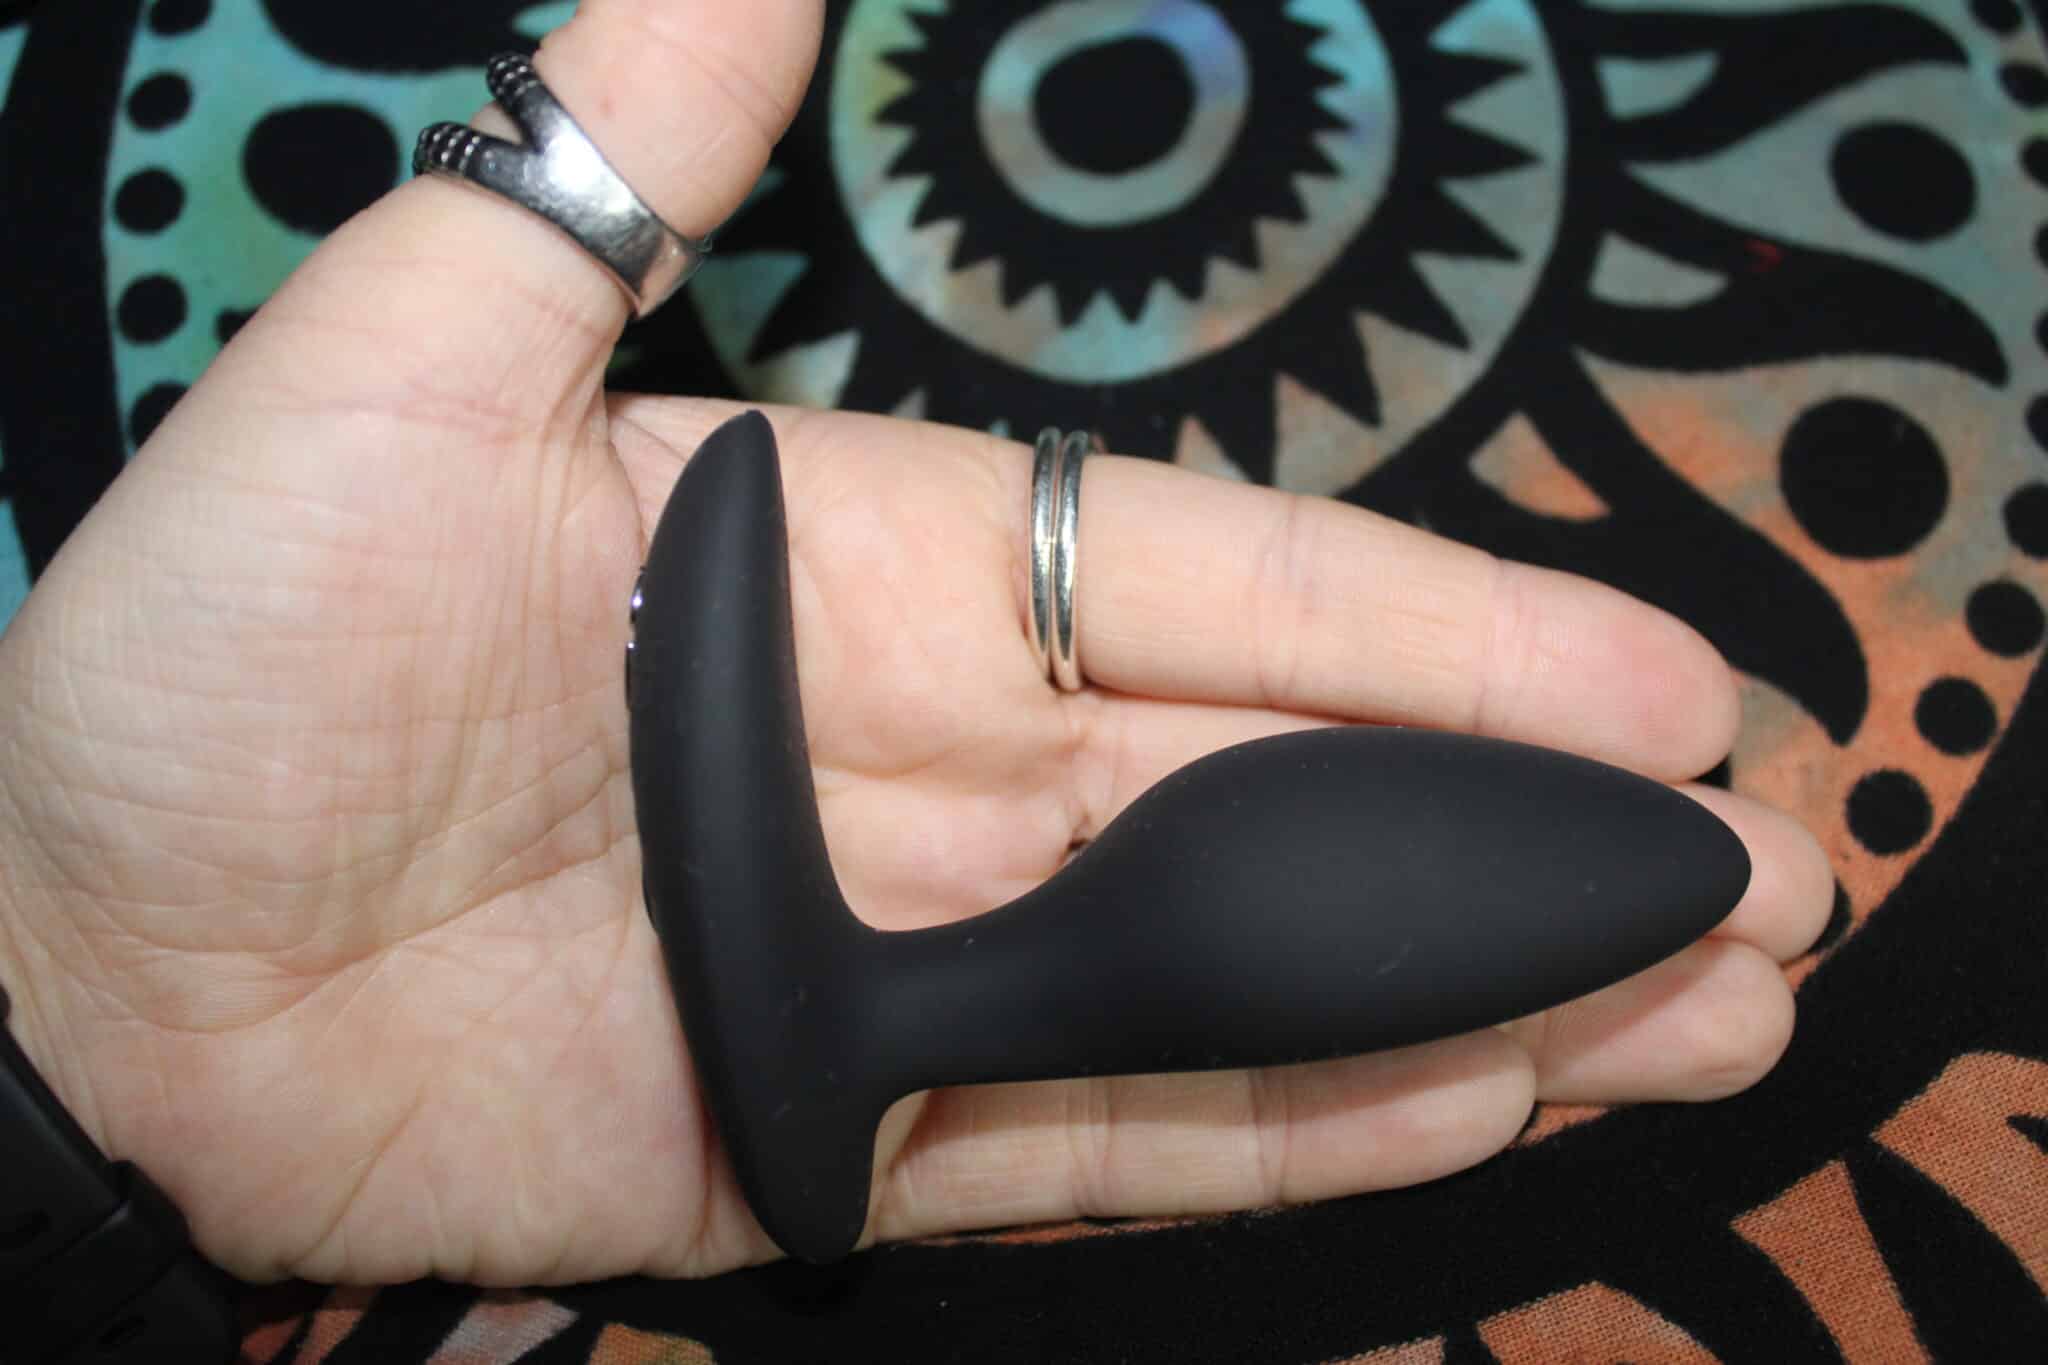 We-Vibe Ditto+ Weighing up the Performance of the We-Vibe Ditto+